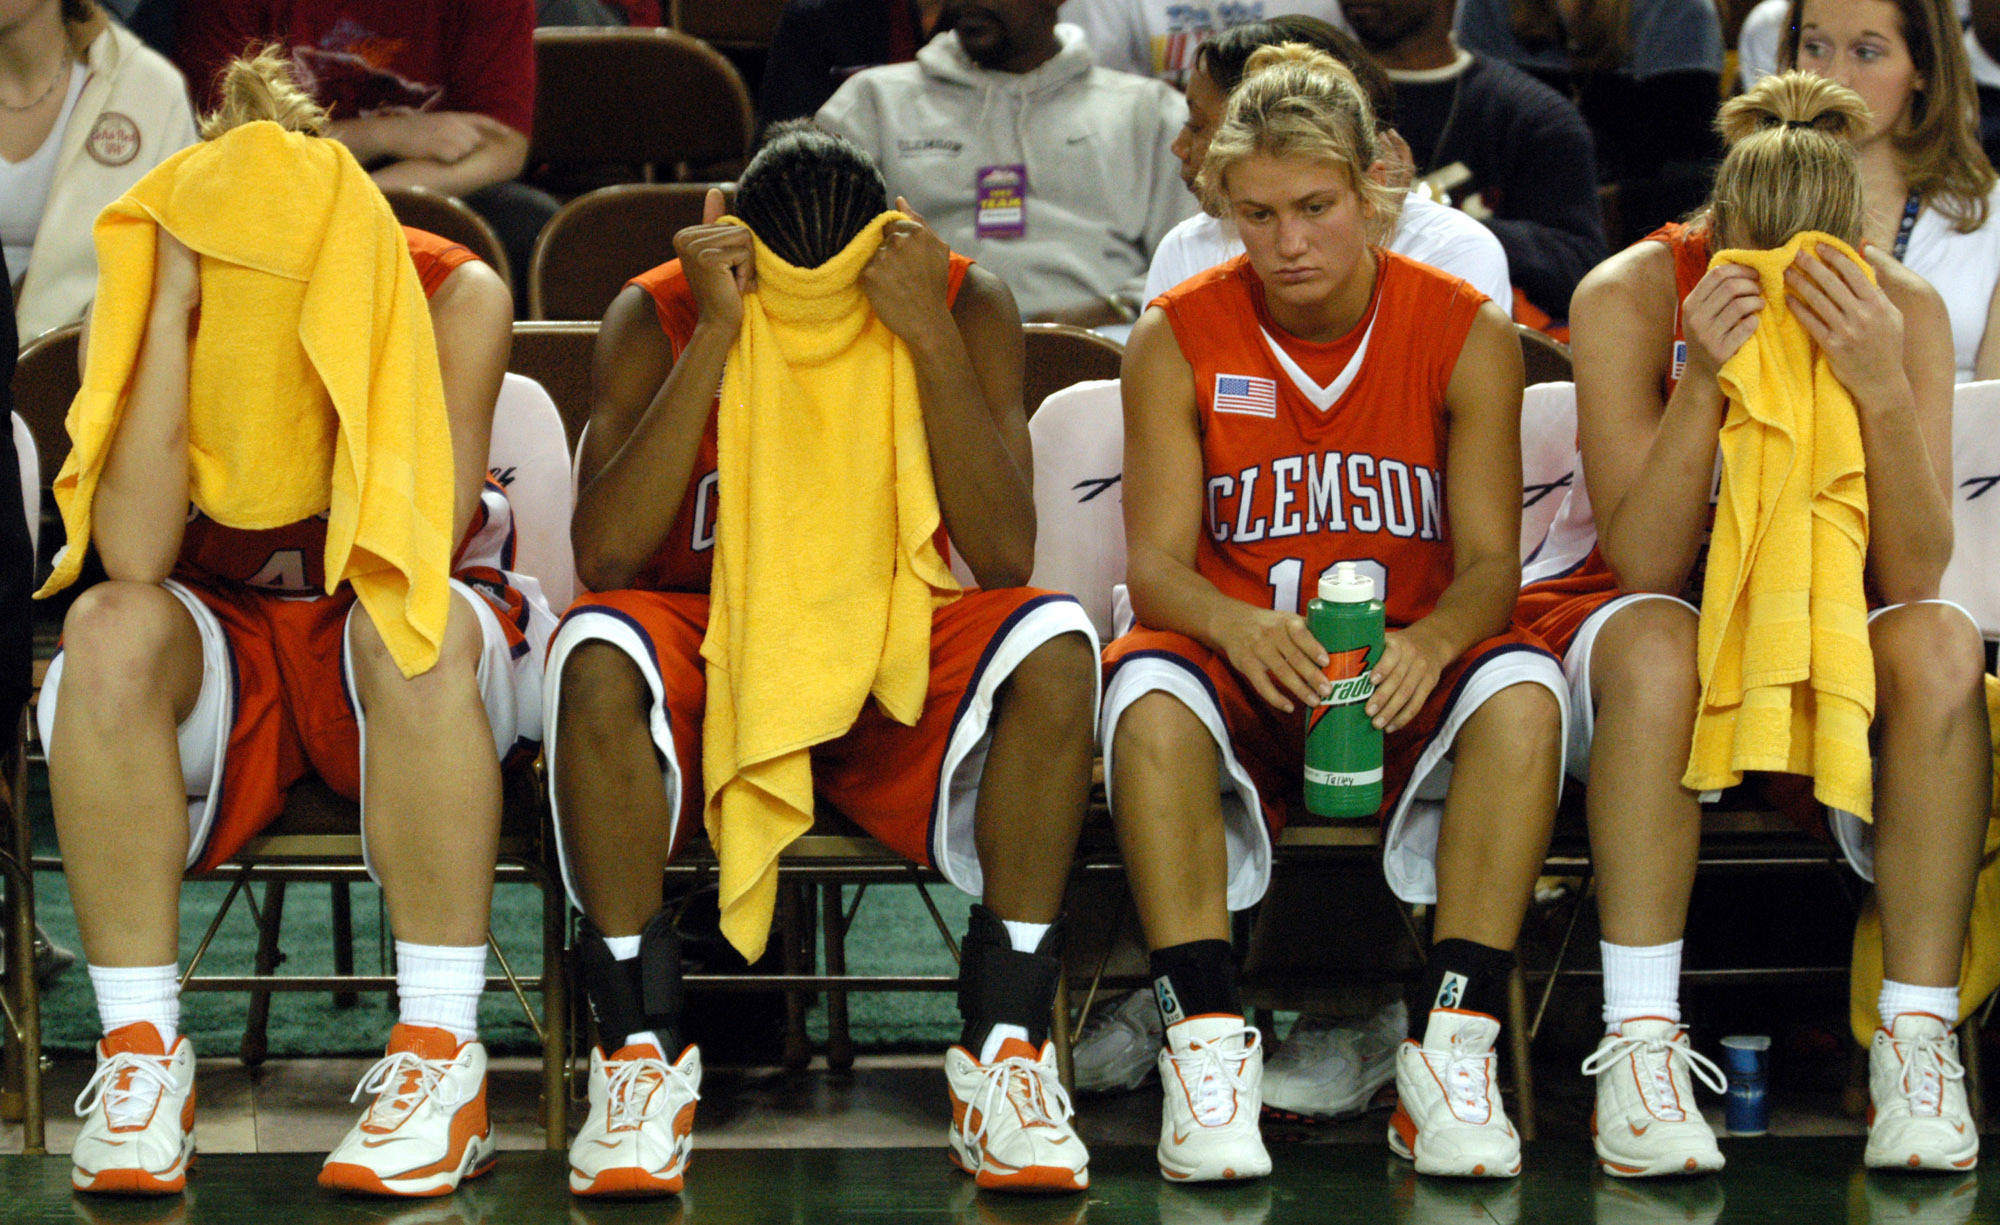 FILE - In this Nov. 26, 2003, file photo, from left, Clemson’s Maggie Slosser, Lakeia Stokes, Julie Talley and Julie Aderhold sit on the bench after Clemson’s 61-58 loss to Alasaka-Anchorage in the championship game of the Great Alaska Shootout on in Anchorage, Alaska. Shootout fans over the years witnessed the best of college basketball, with Duke, North Carolina, Kentucky, Michigan State and UCLA winning titles, but the end is near. The 40th Shootout will be the last, a victim of changed rules and competition.(AP Photo/Michael Dinneen, file